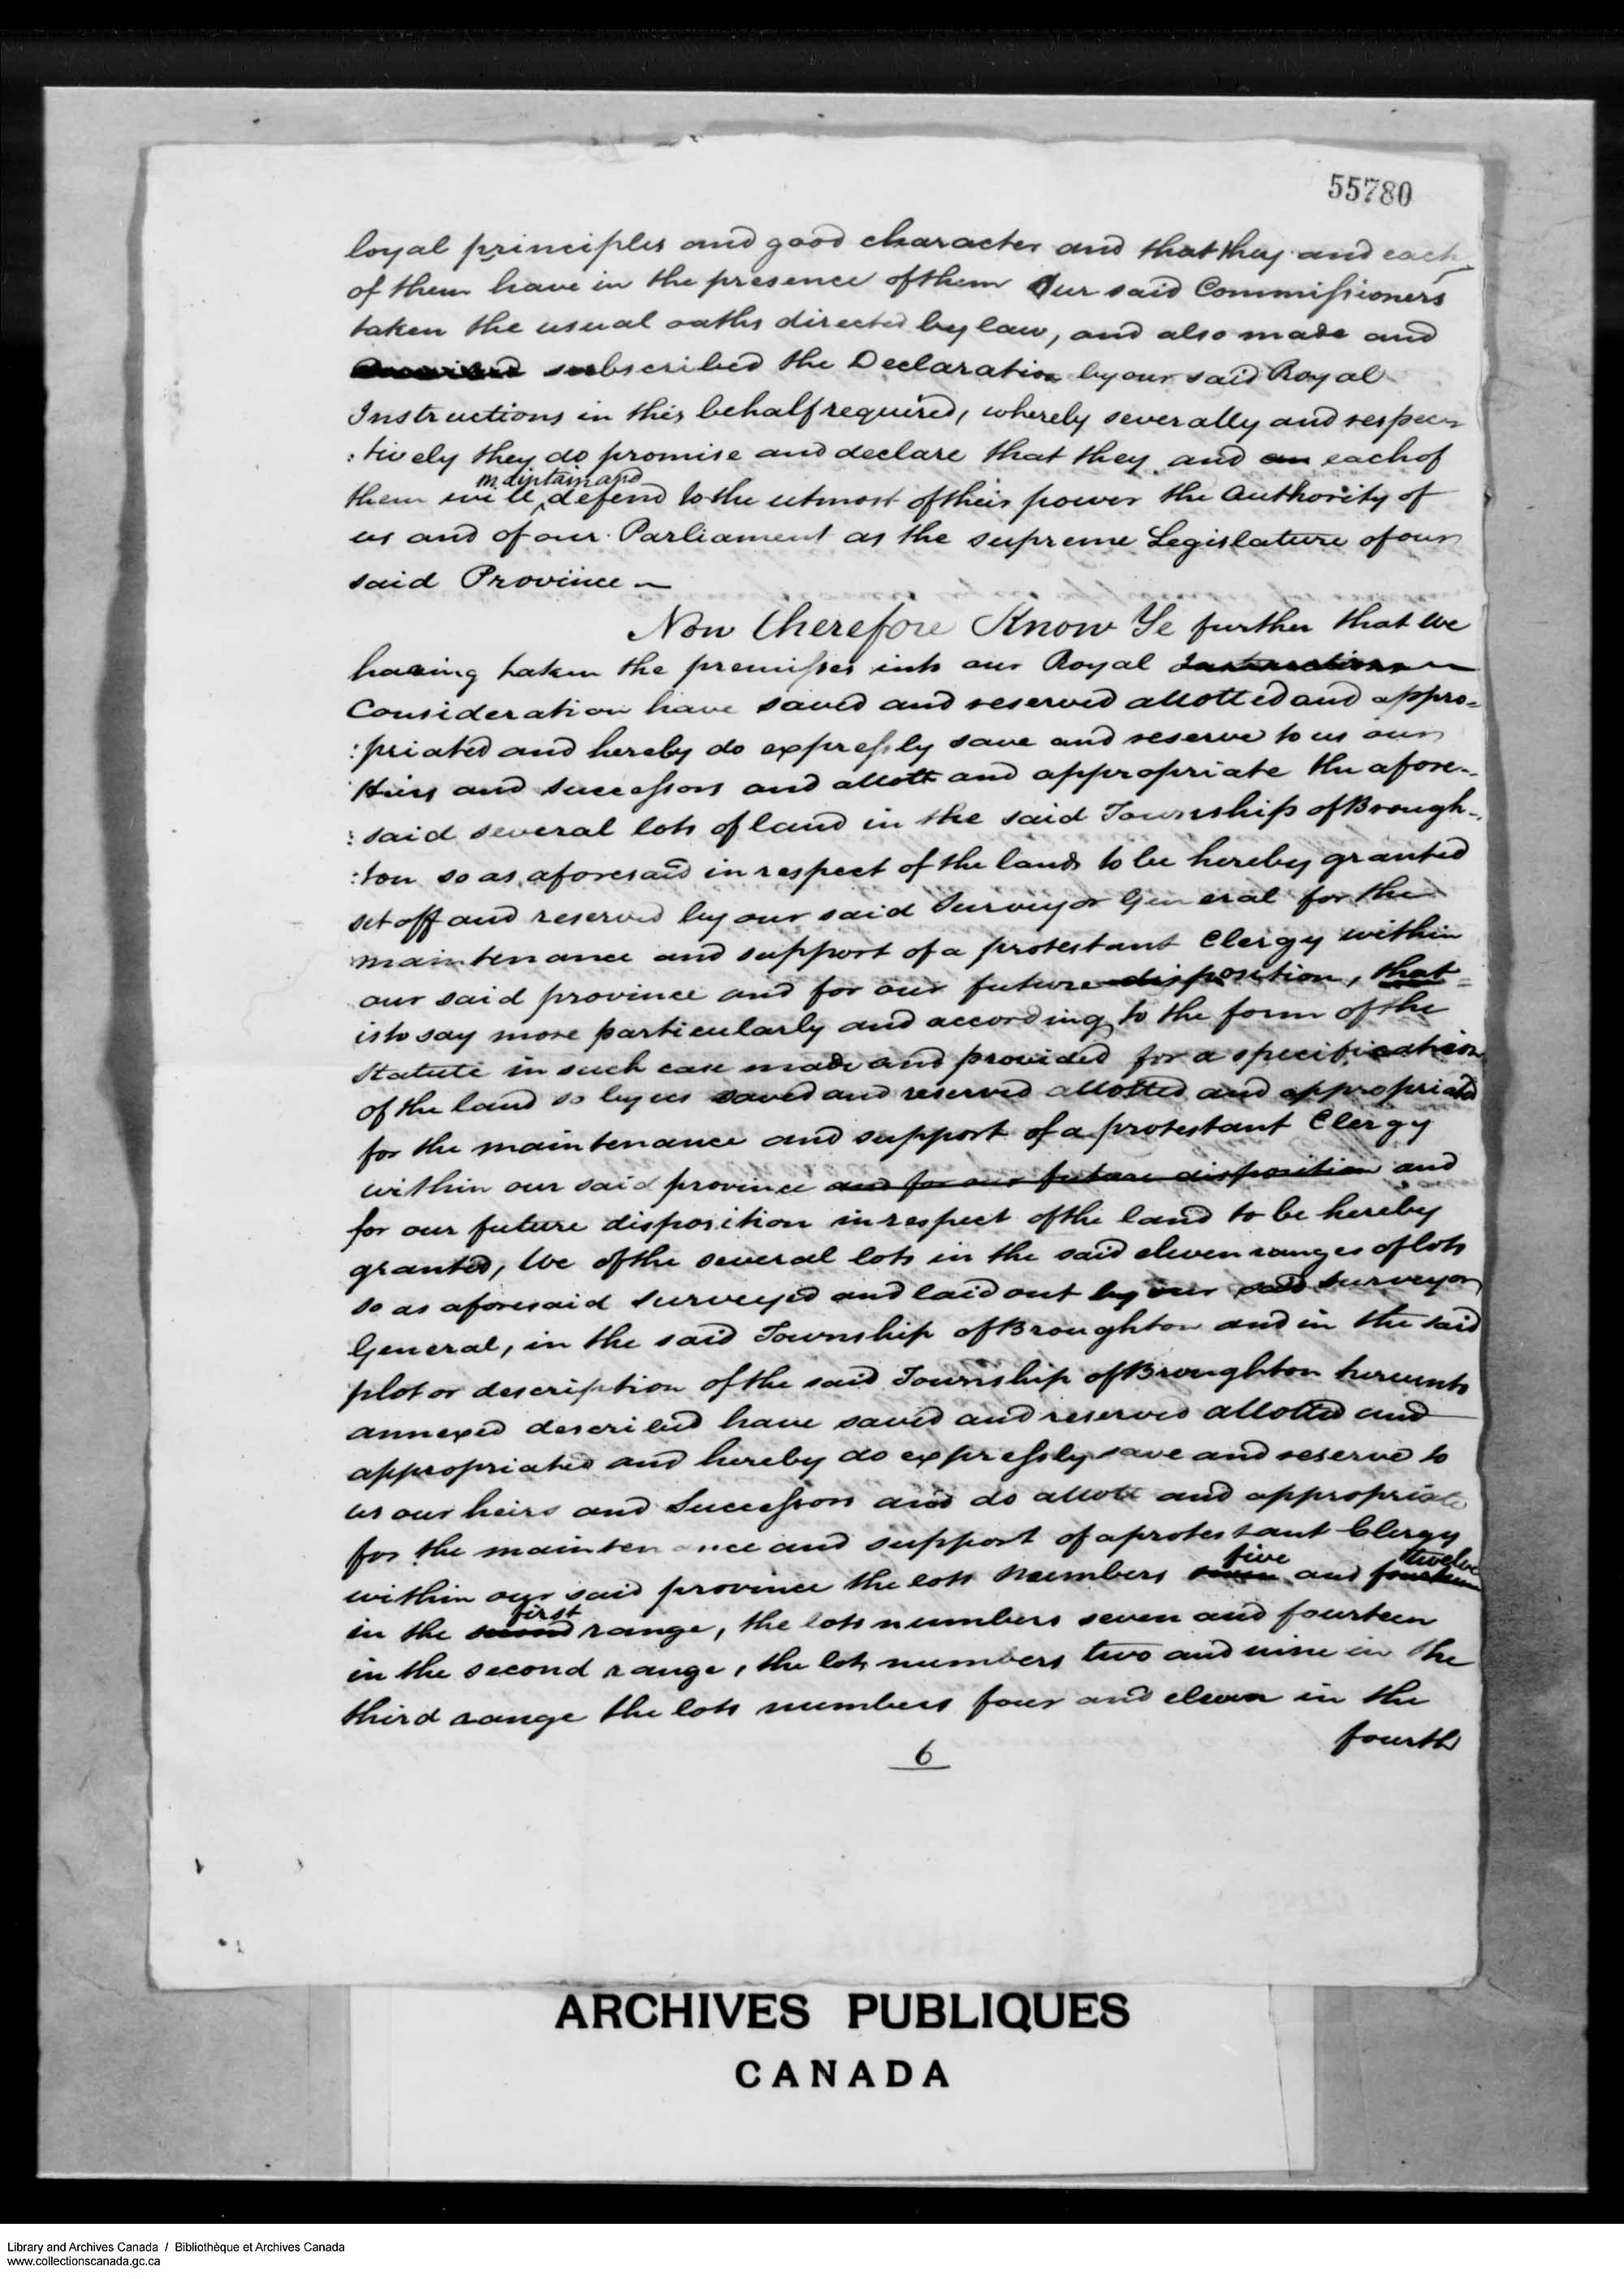 Digitized page of  for Image No.: e008700268